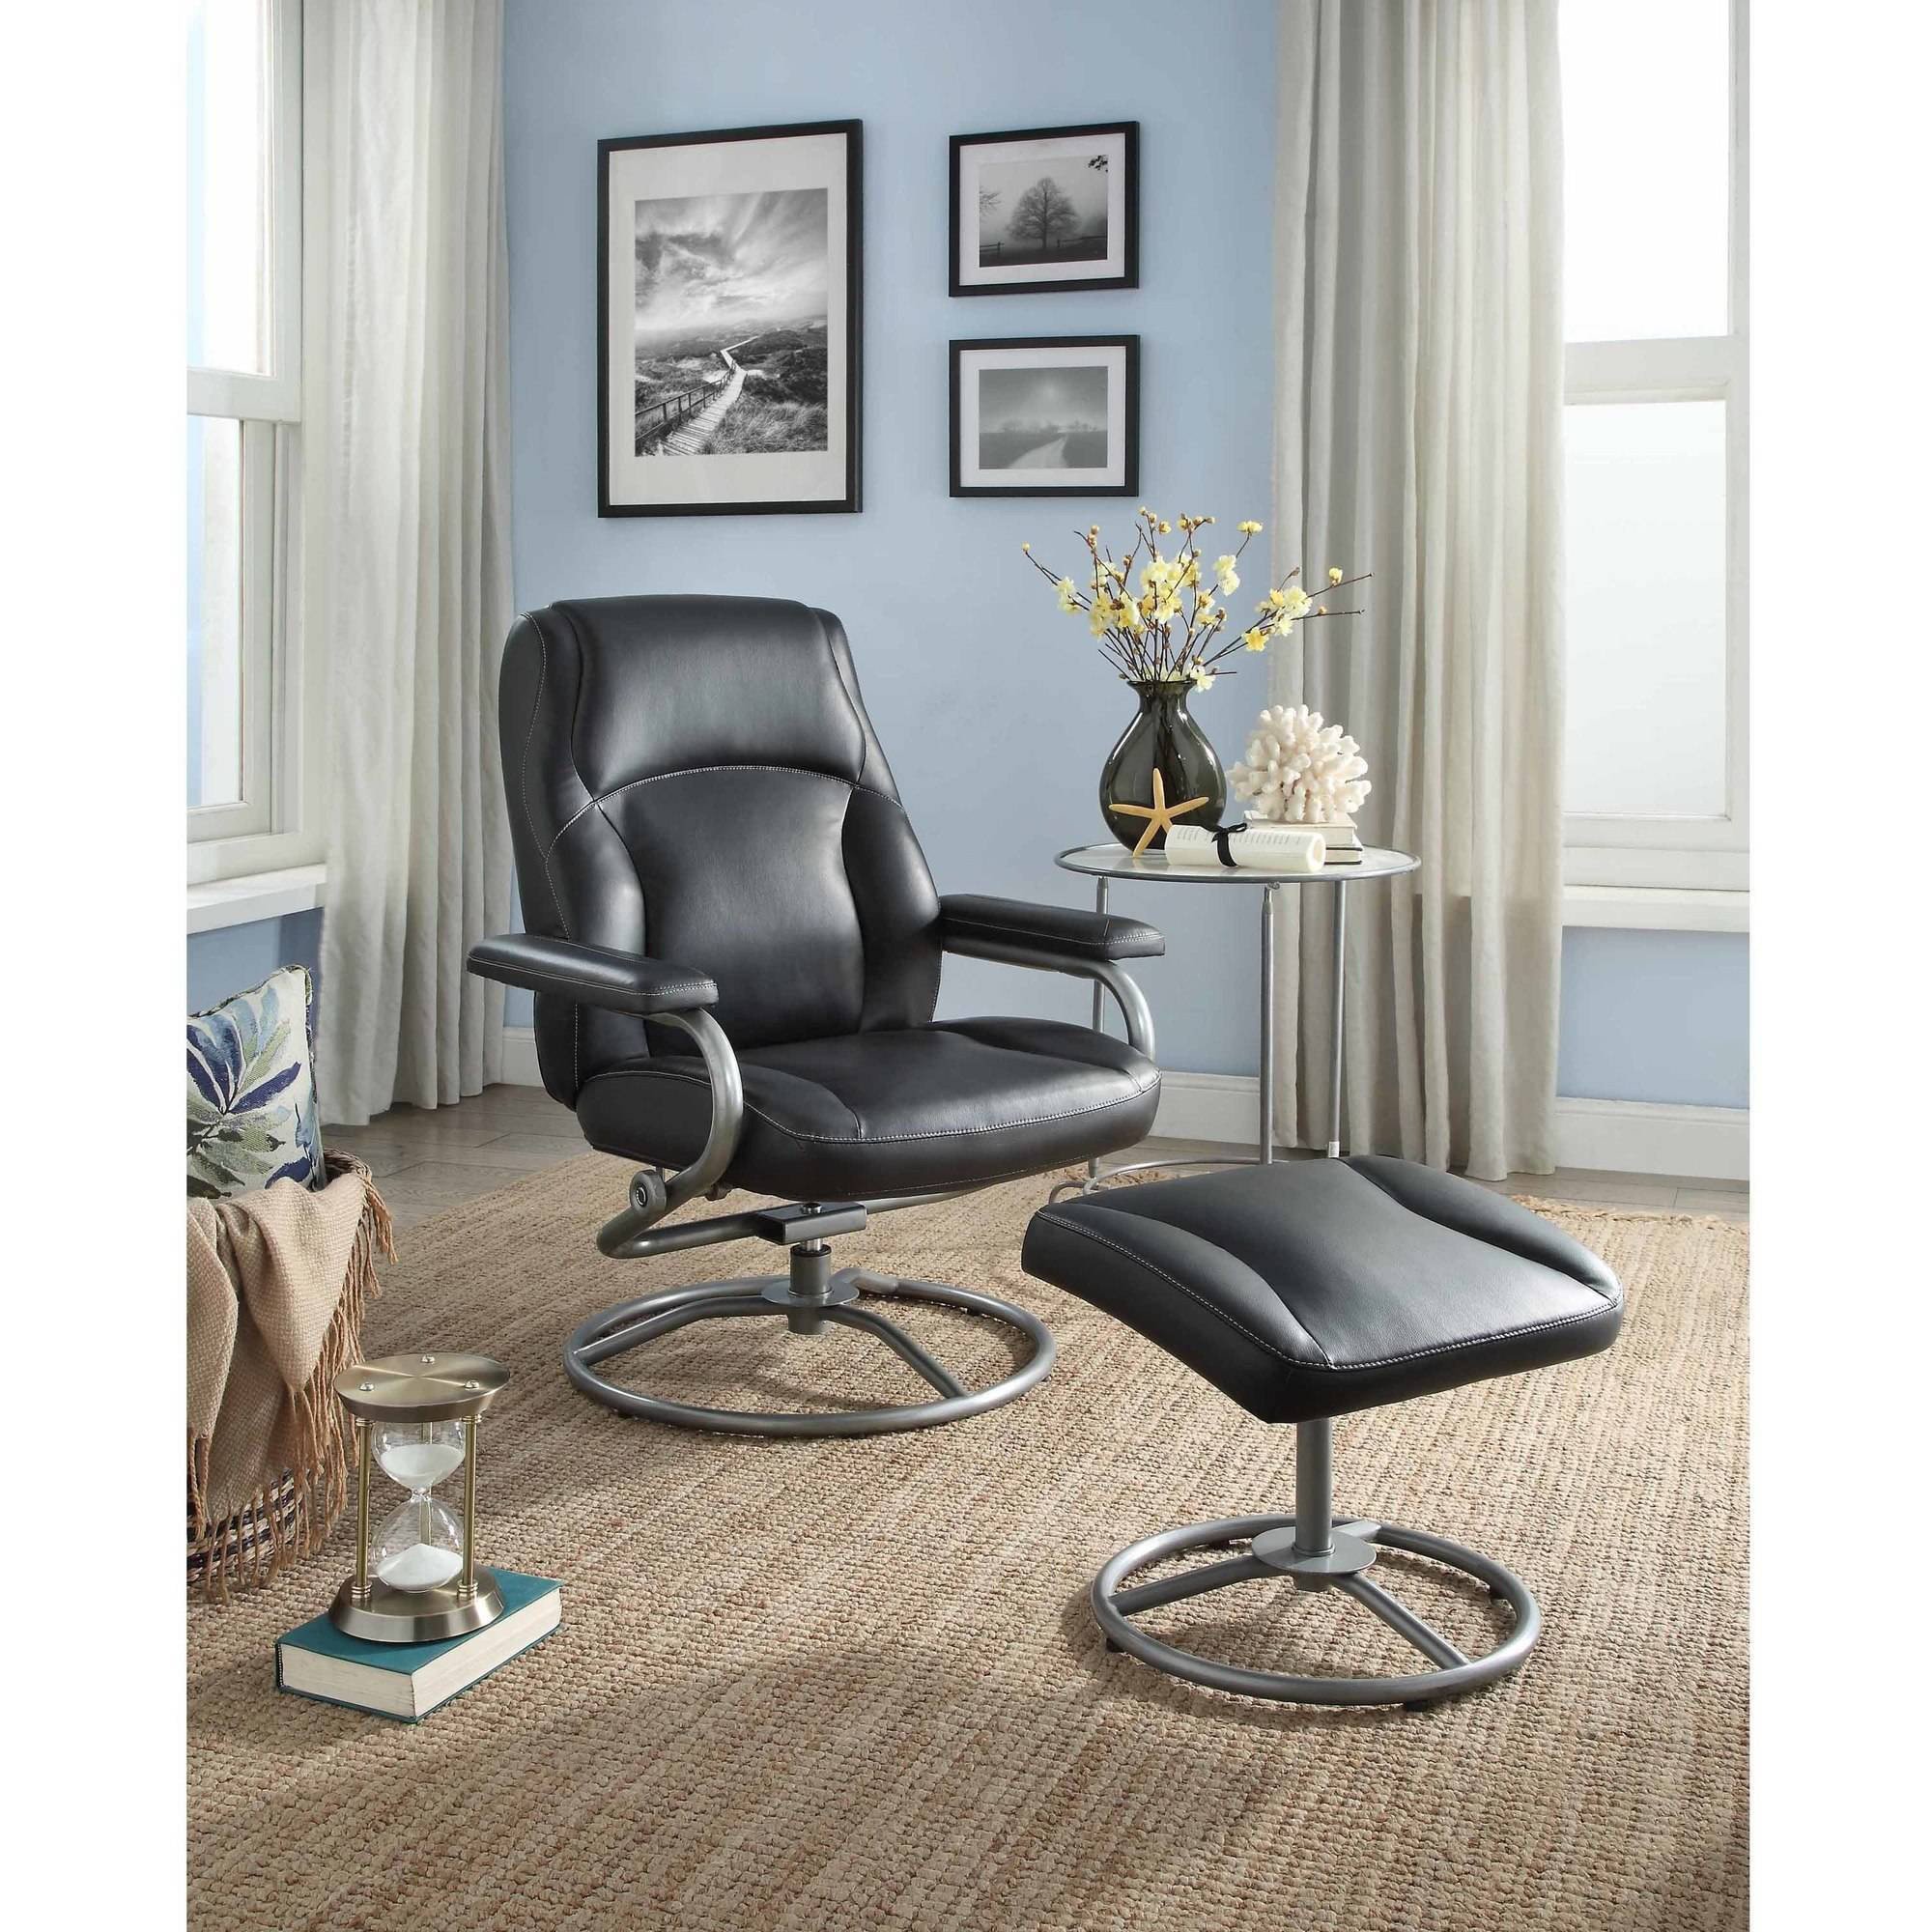 Small Comfy Chair for Bedroom Beautiful Mainstays Plush Pillowed Recliner Swivel Chair and Ottoman Set Multiple Available Colors Walmart